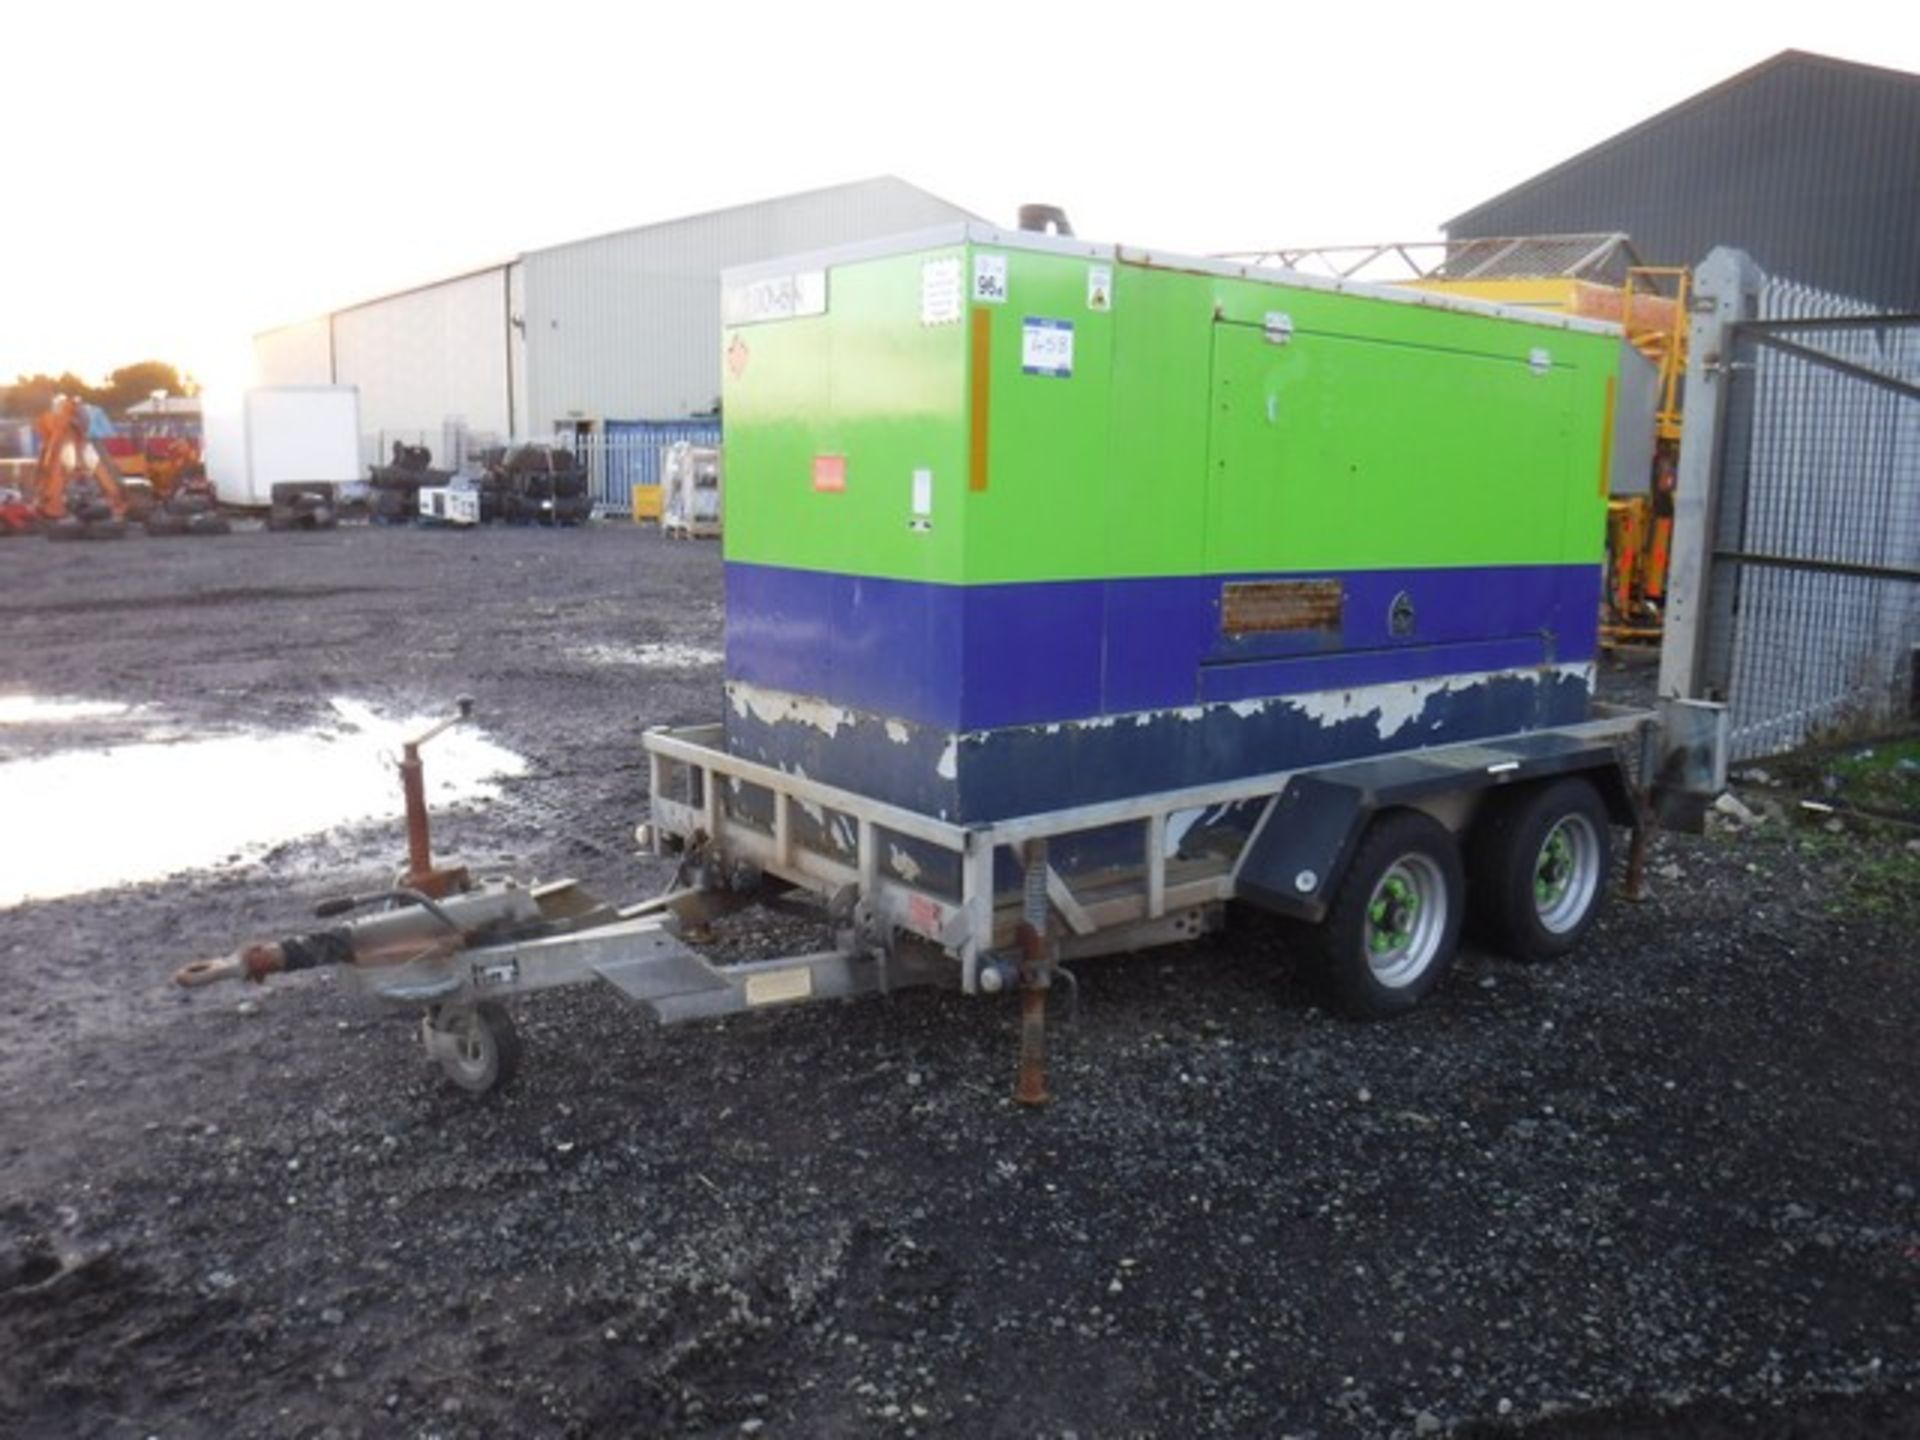 FG WILSON LCH 100 KVA generator on twin axle trailer ID 100.5 S/N FGWPEP04TEOA04104. 15634hrs. Asset